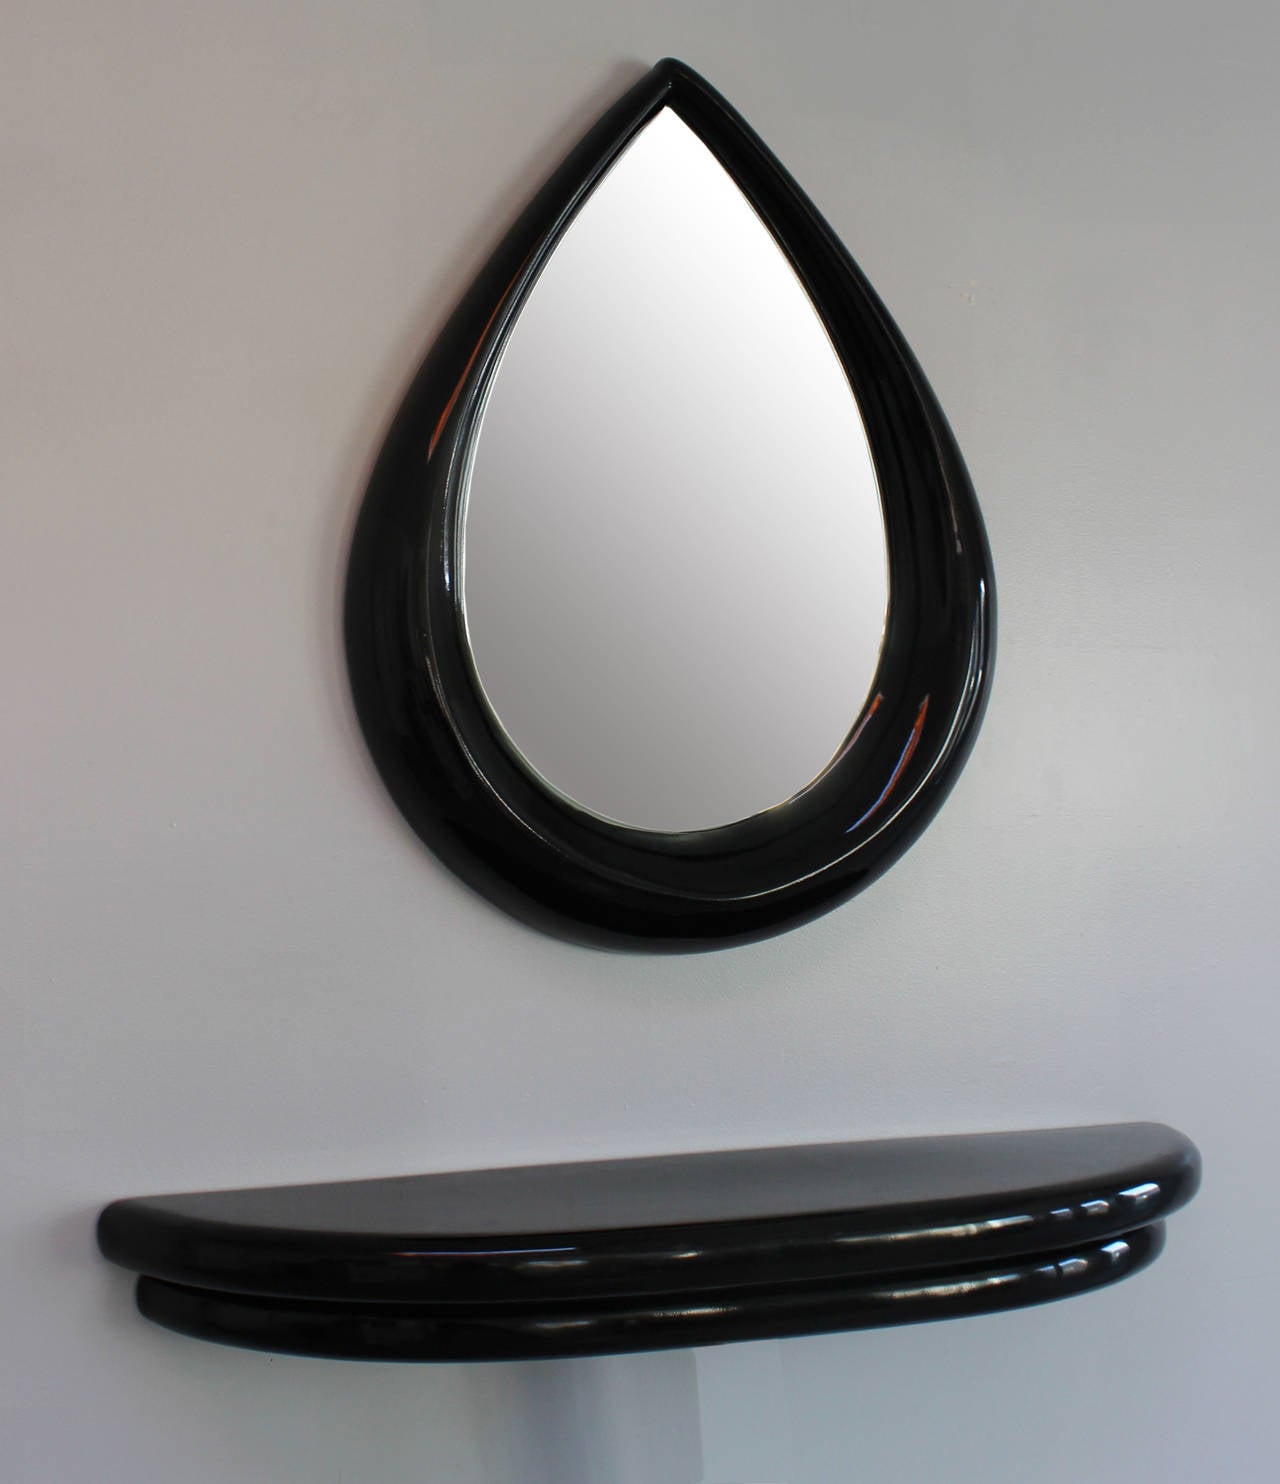 A modern, black lacquered wood frame teardrop mirror and wall mounted console.

mirror: 36